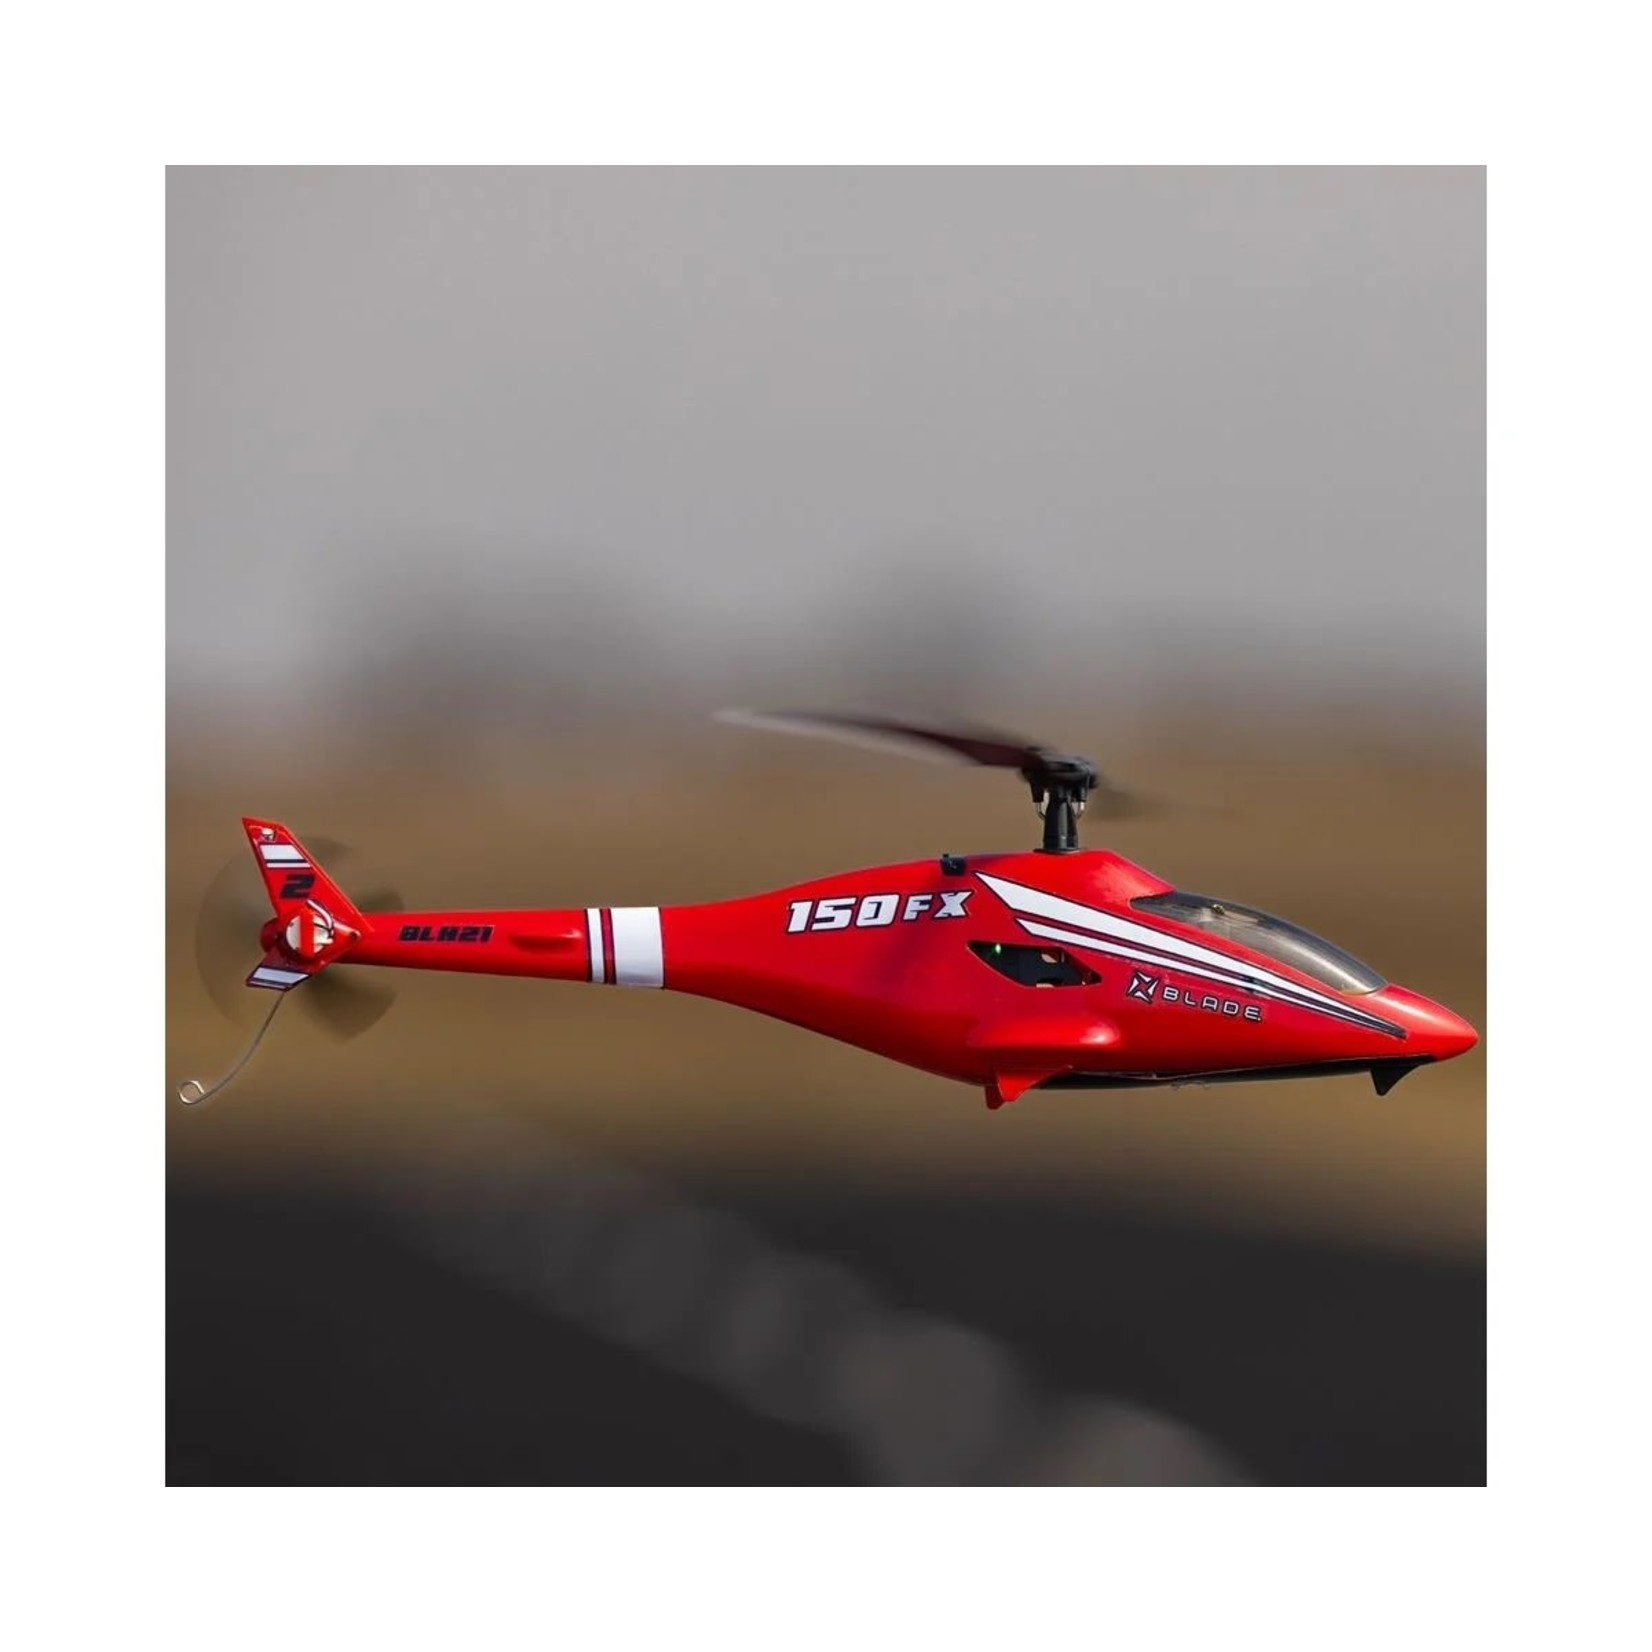 Blade Blade 150 FX Fixed Pitch Trainer RTF Electric Micro Helicopter w/2.4GHz Radio #BLH4400